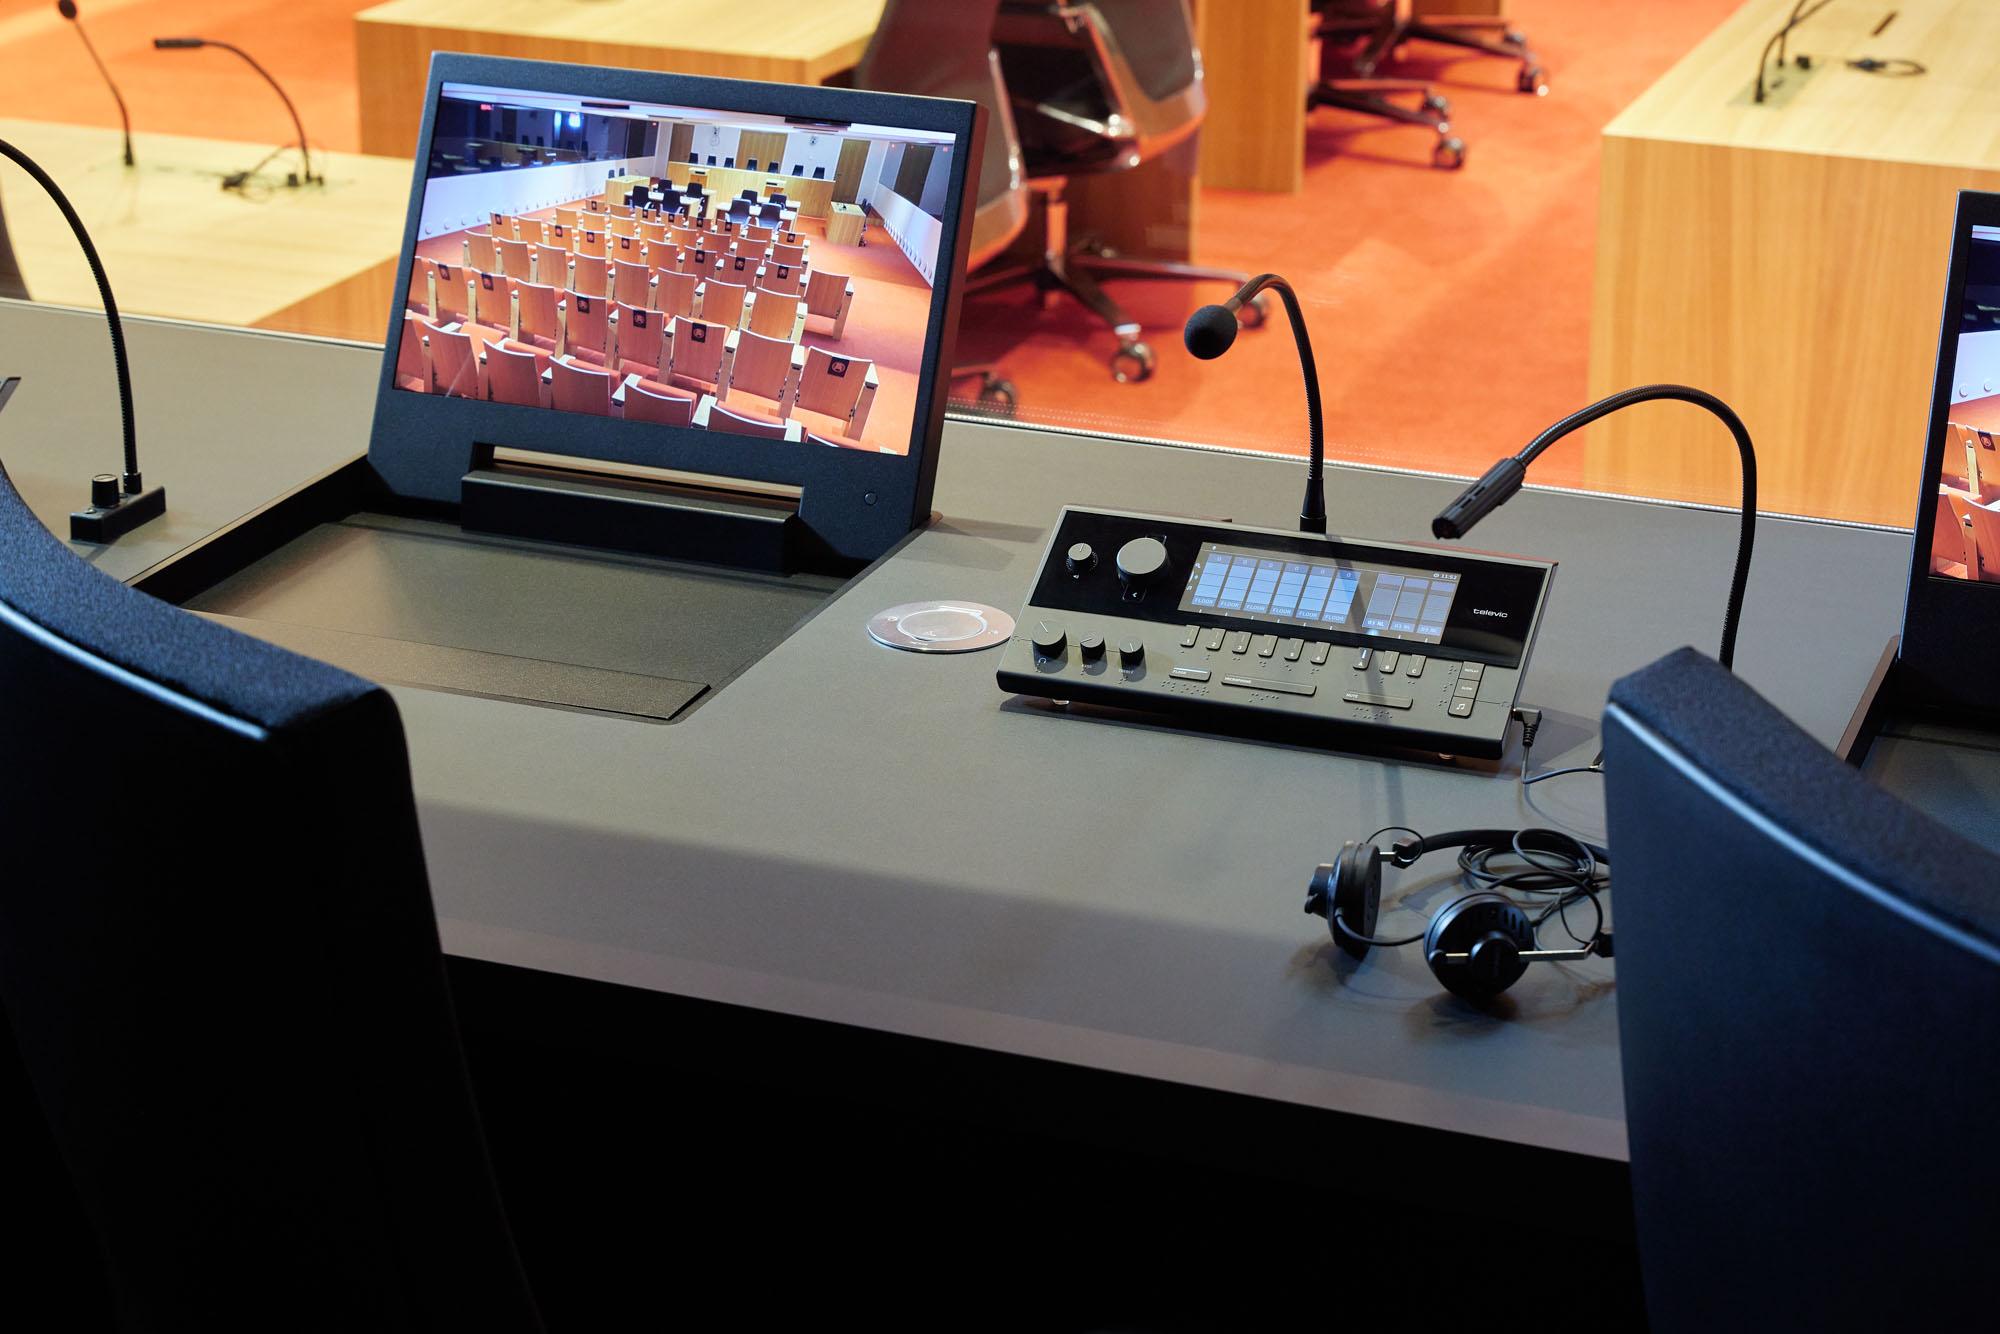 European Court of Justice, Luxemburg,Televic Conference Interpretation Solutions Simultaneous Interpretation interpreter desk Lingua ID